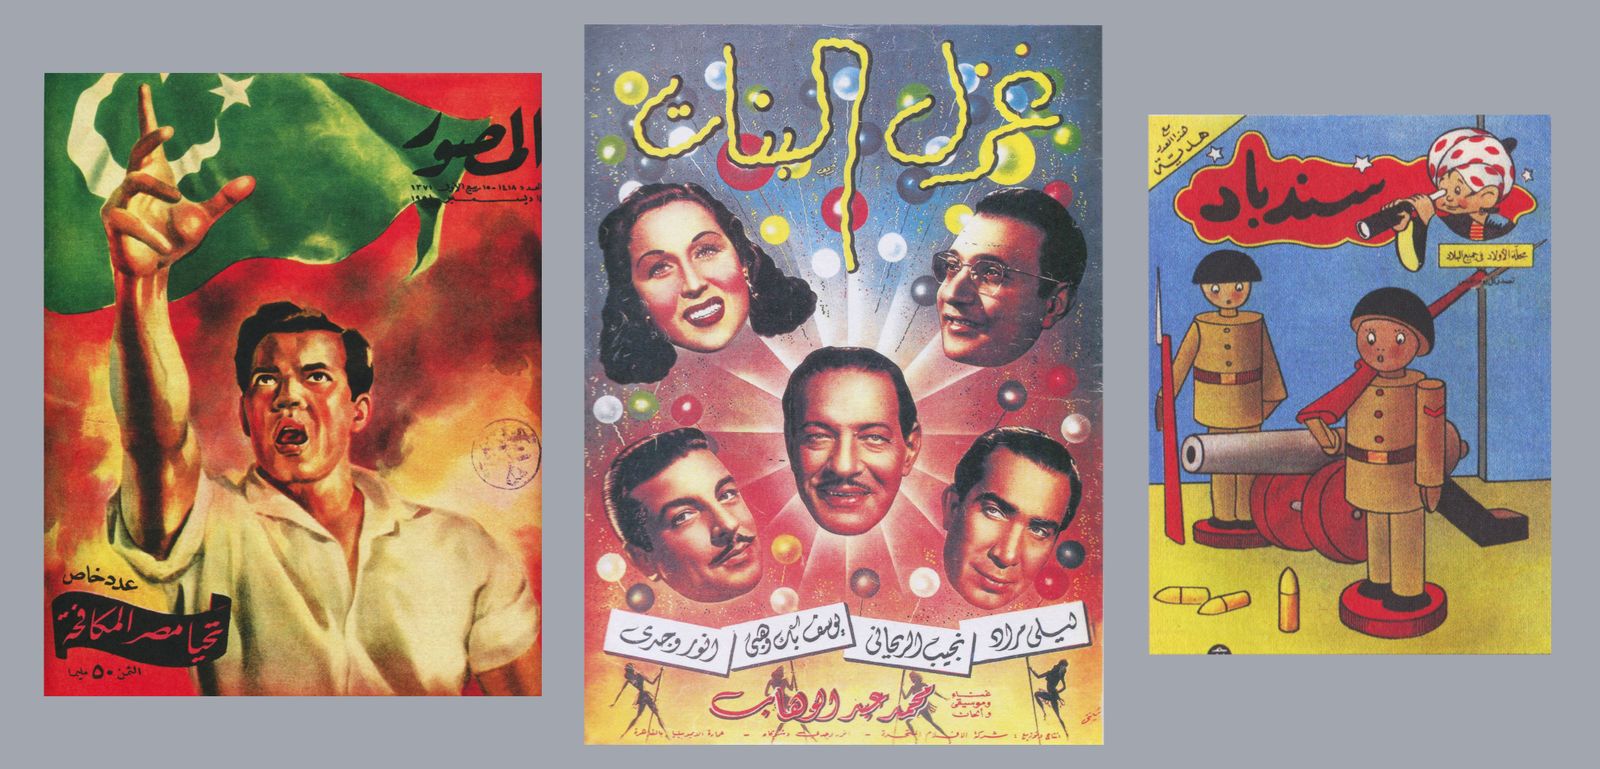 (From left to right) Al-Musawwar cover, 1956; Ghazal al-banat press book cover, 1949; Sindibad children’s magazine, designed by Hussein Bicar, year unknown